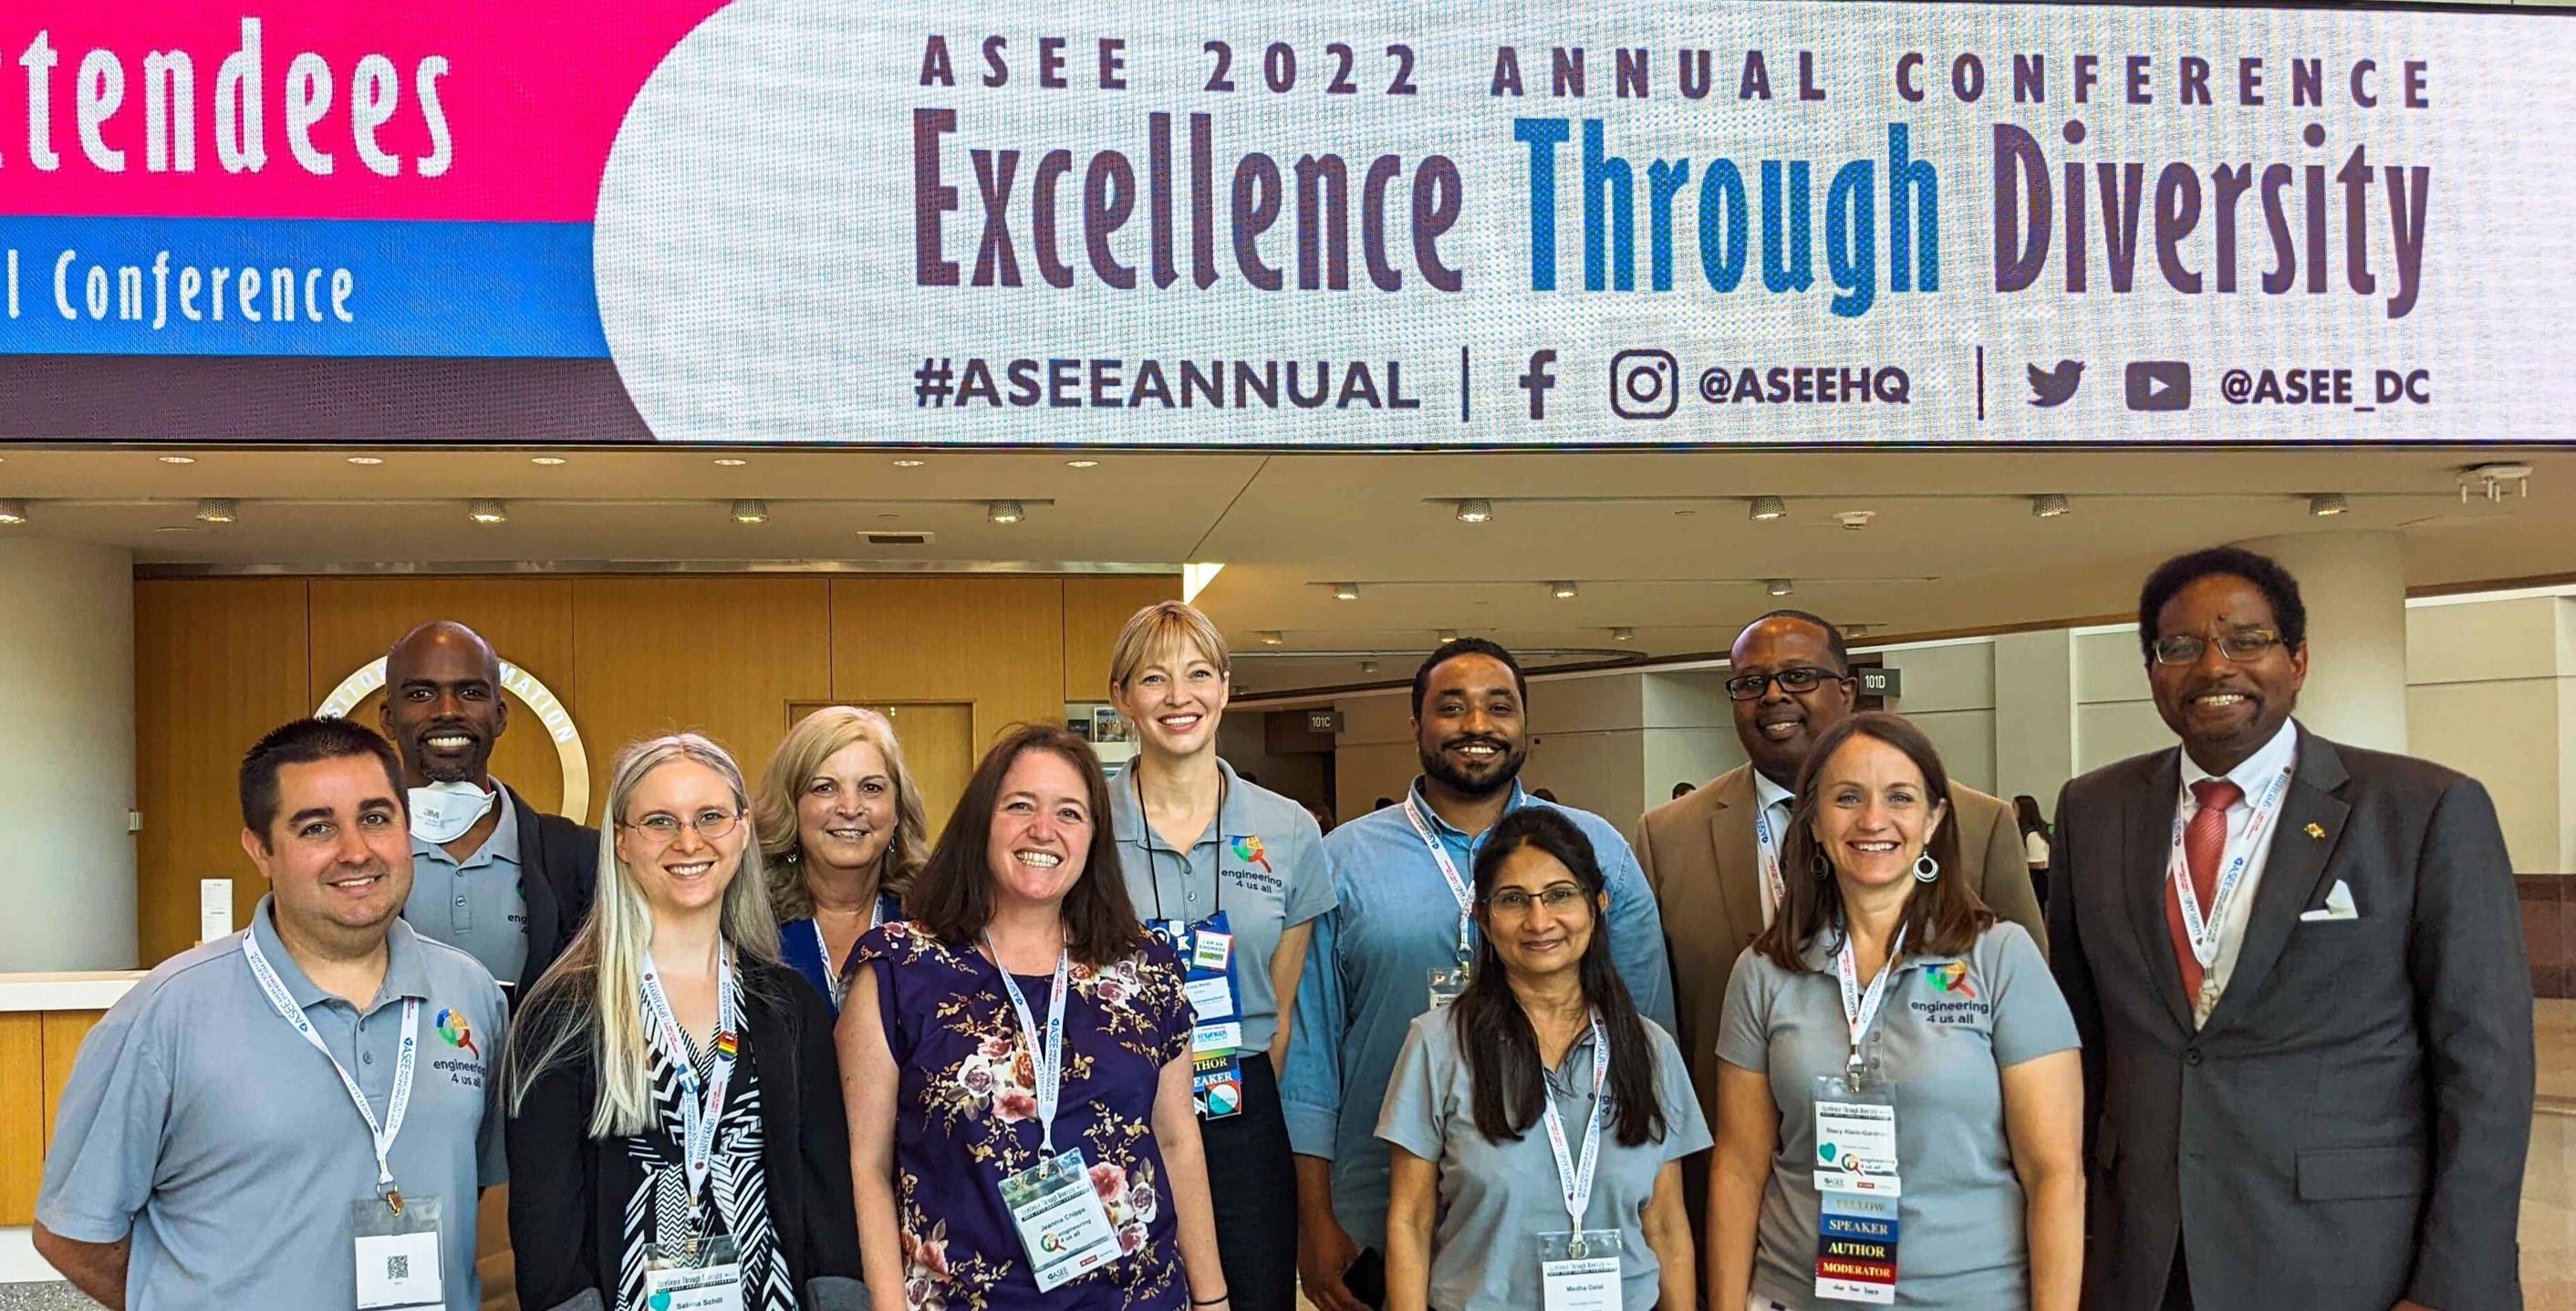 ASEE conference 2022